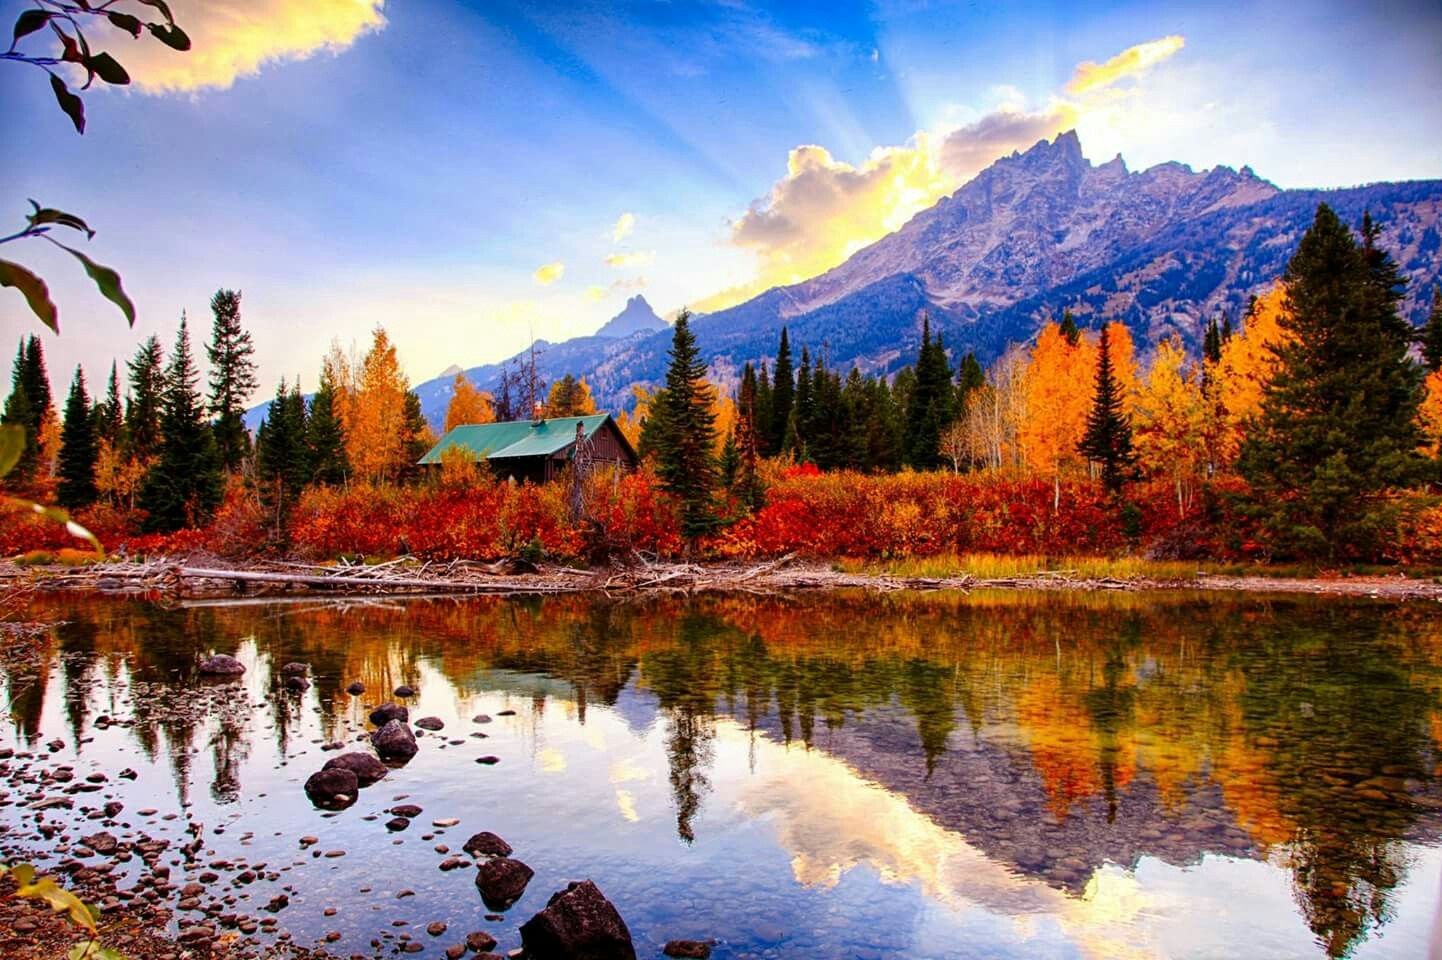 During the fall season (September to October)- best time to visit Grand Teton National Park